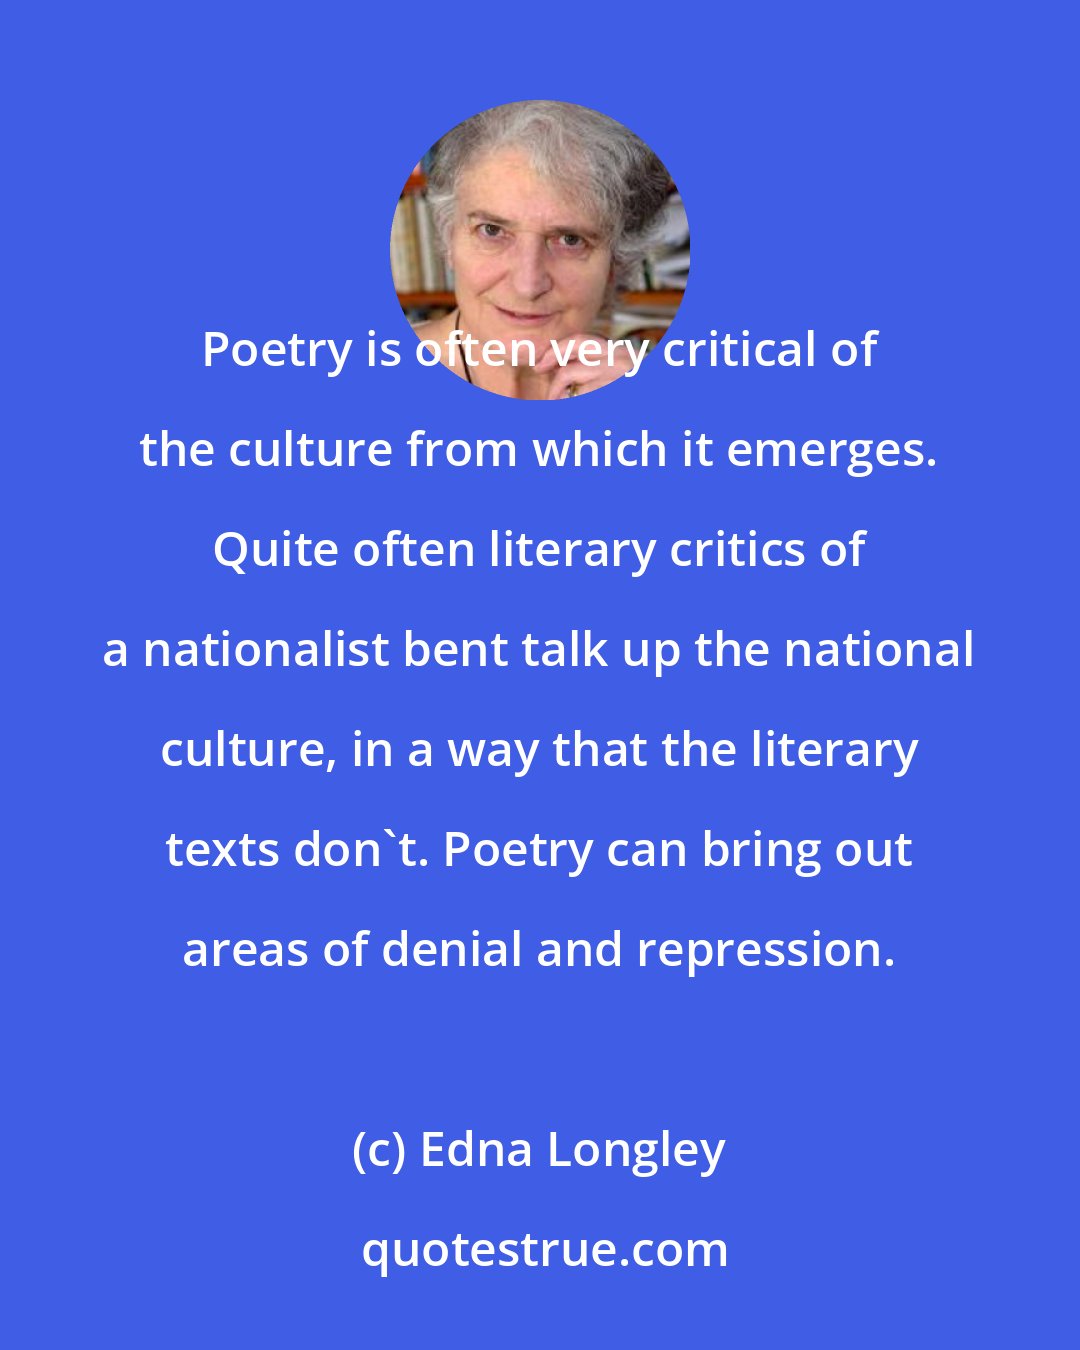 Edna Longley: Poetry is often very critical of the culture from which it emerges. Quite often literary critics of a nationalist bent talk up the national culture, in a way that the literary texts don't. Poetry can bring out areas of denial and repression.